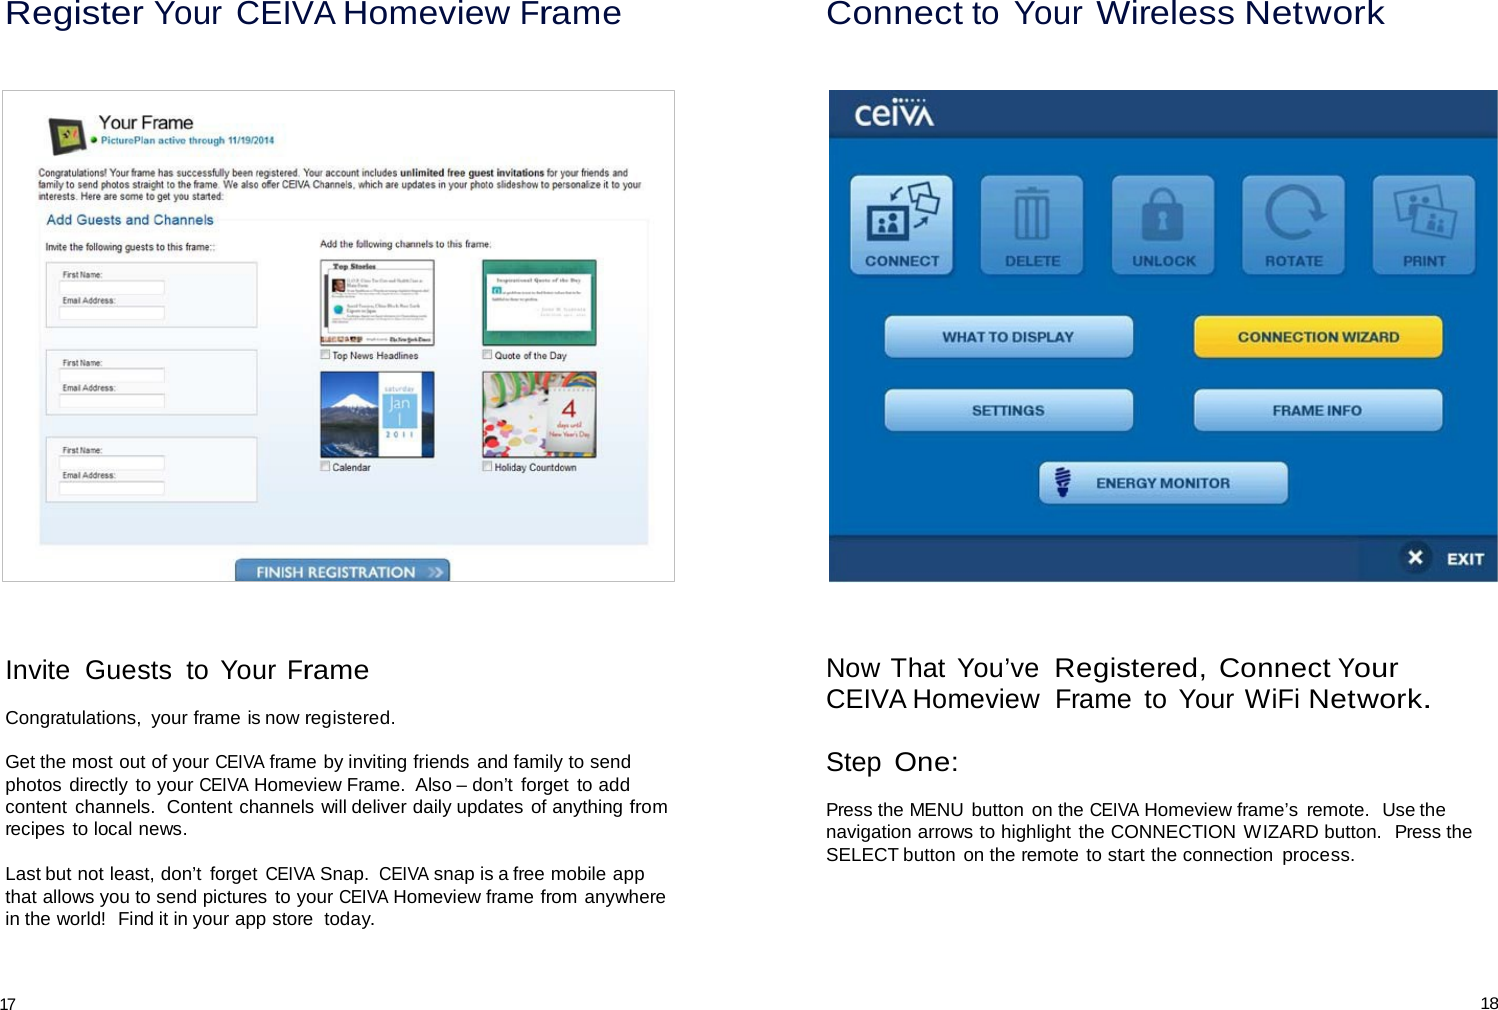 Register Your CEIVA Homeview Frame Connect to Your Wireless Network         Invite  Guests  to Your Frame  Congratulations,  your frame is now registered.  Get the most out of your CEIVA frame by inviting friends and family to send photos directly  to your CEIVA Homeview Frame.  Also – don’t  forget  to add content channels.  Content channels will deliver daily updates of anything from recipes to local news.  Last but not least, don’t  forget CEIVA Snap. CEIVA snap is a free mobile app that allows you to send pictures to your CEIVA Homeview frame from anywhere in the world!  Find it in your app store  today. Now That  You’ve Registered, Connect Your CEIVA Homeview  Frame  to Your WiFi Network.   Step One:  Press the MENU button on the CEIVA Homeview frame’s  remote.  Use the navigation arrows to highlight the CONNECTION WIZARD button.  Press the SELECT button  on the remote to start the connection process.    17 18 